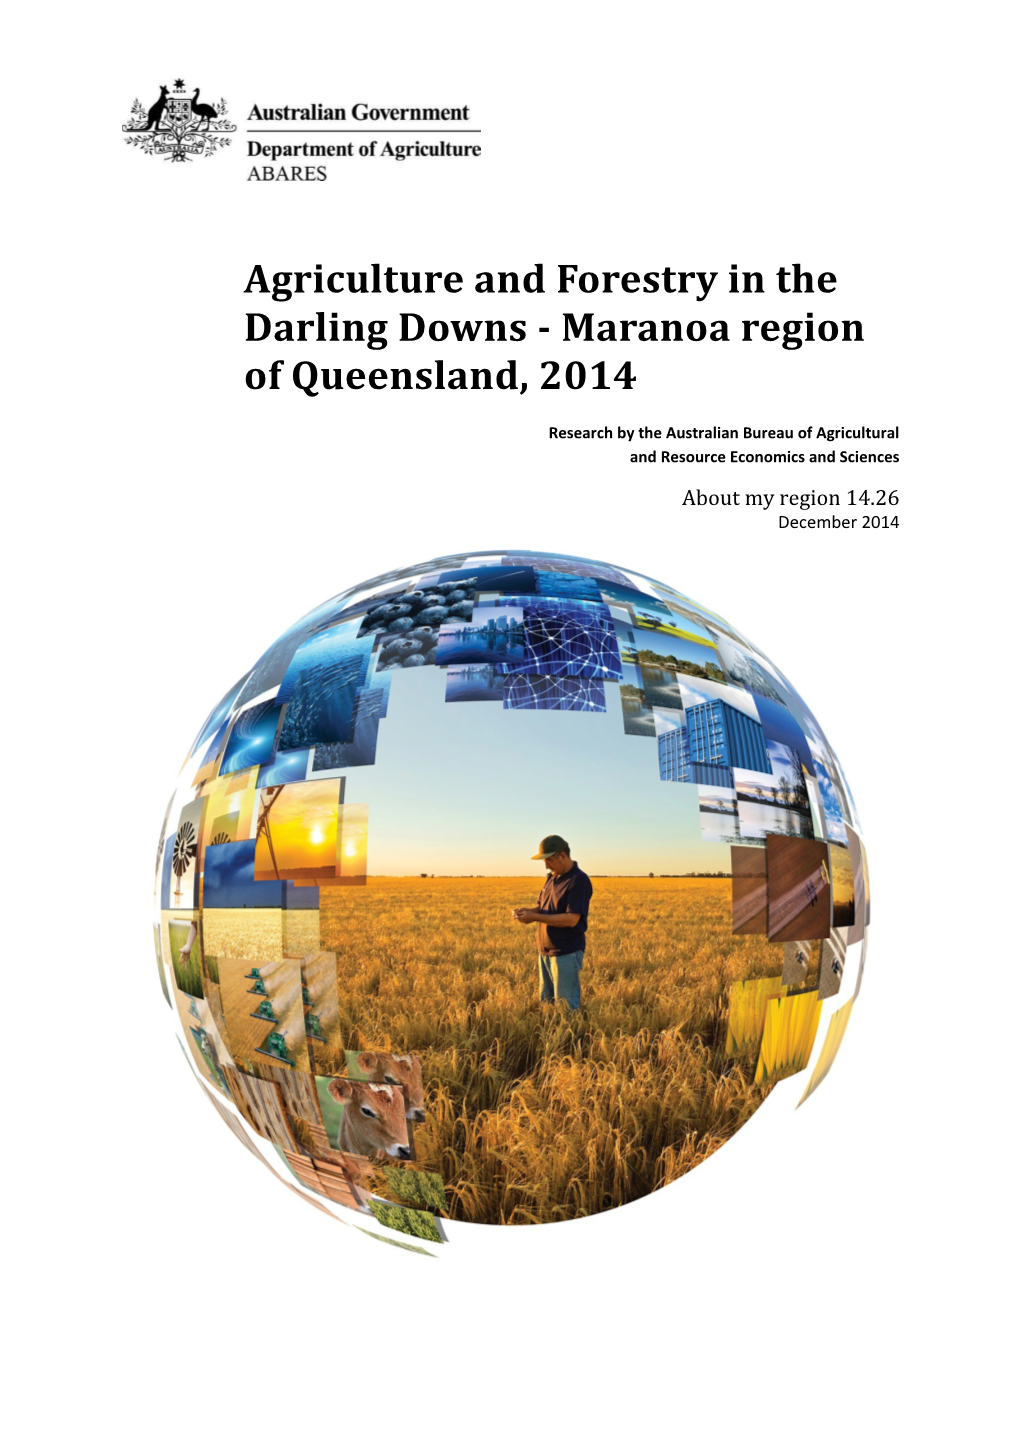 Agriculture and Forestry in the Darling Downs - Maranoa Region of Queensland, 2014